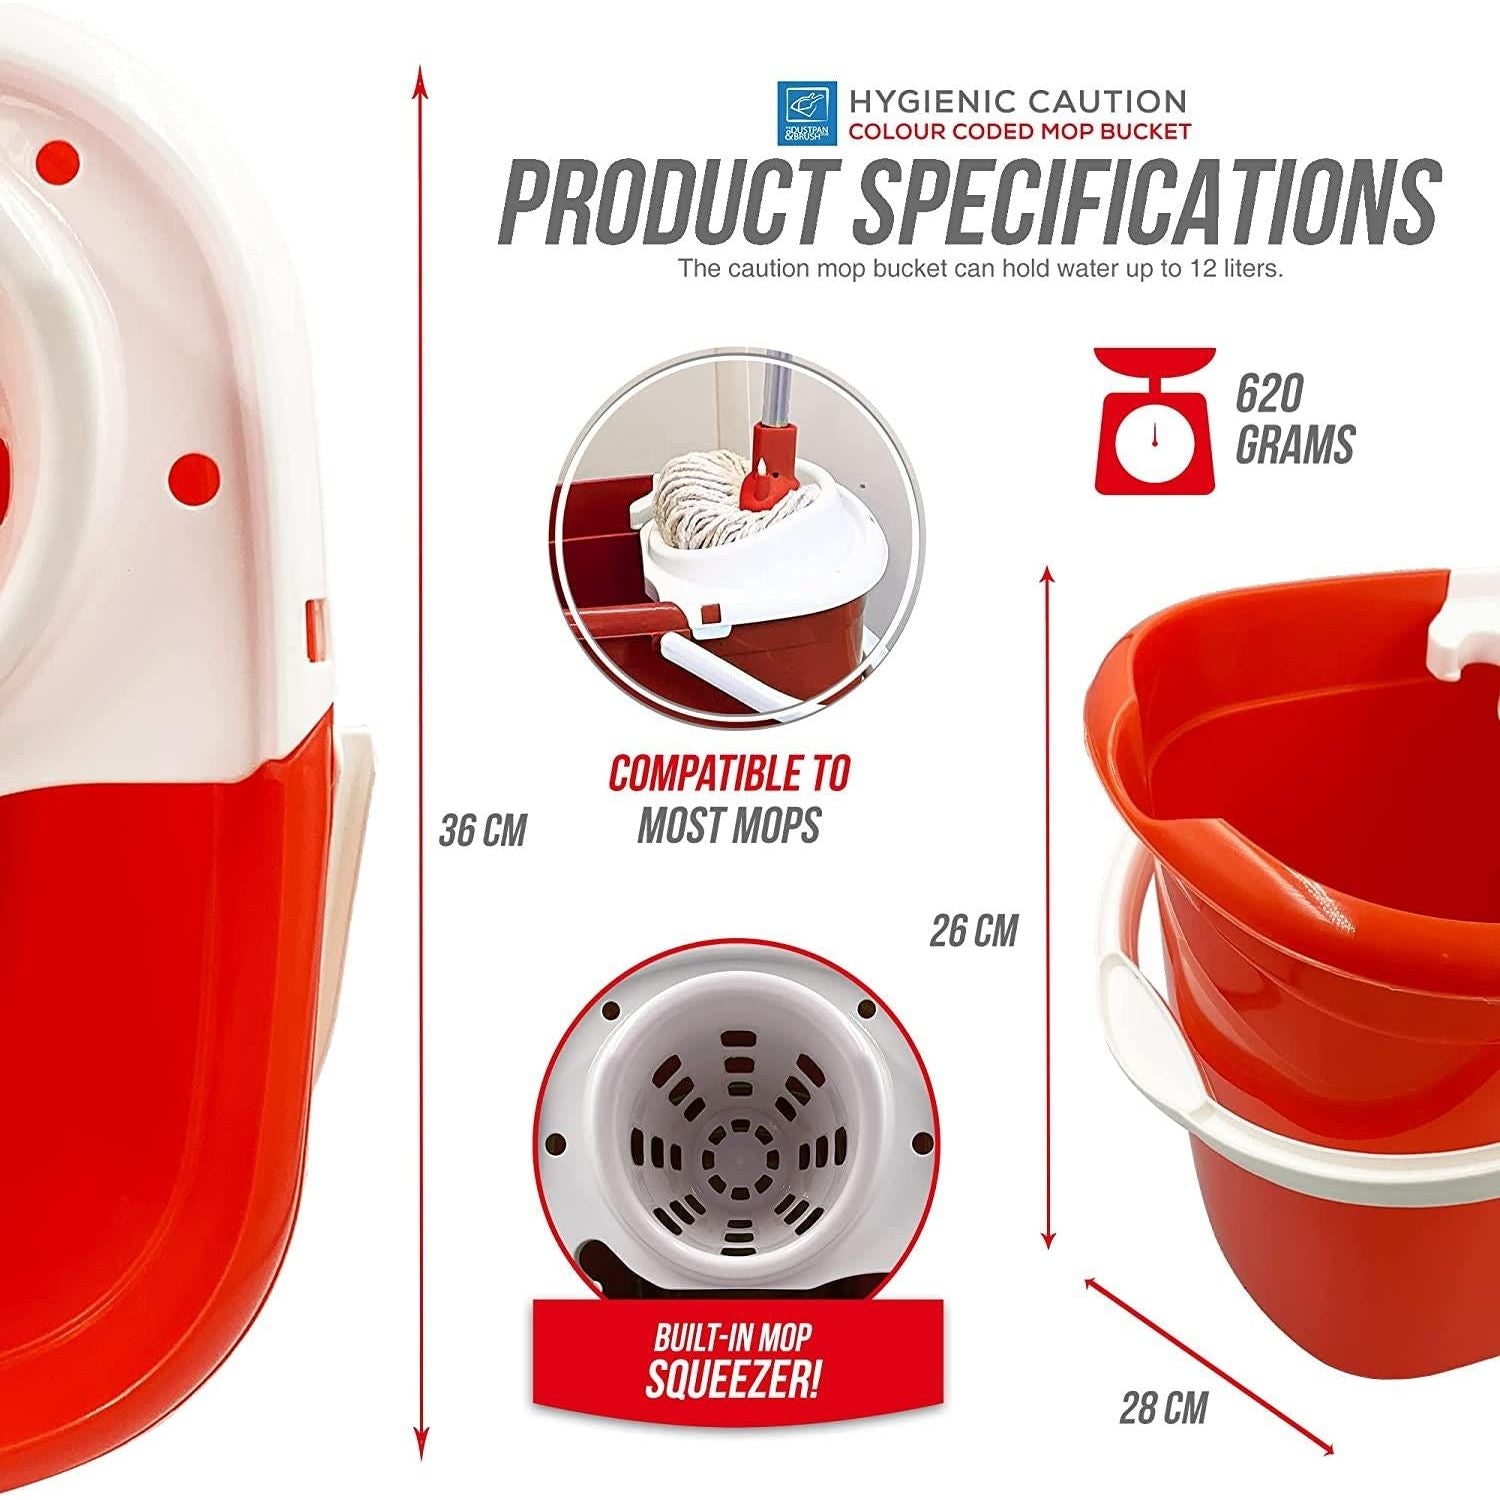 Colour Coded Red/White Caution Warning Mop Bucket